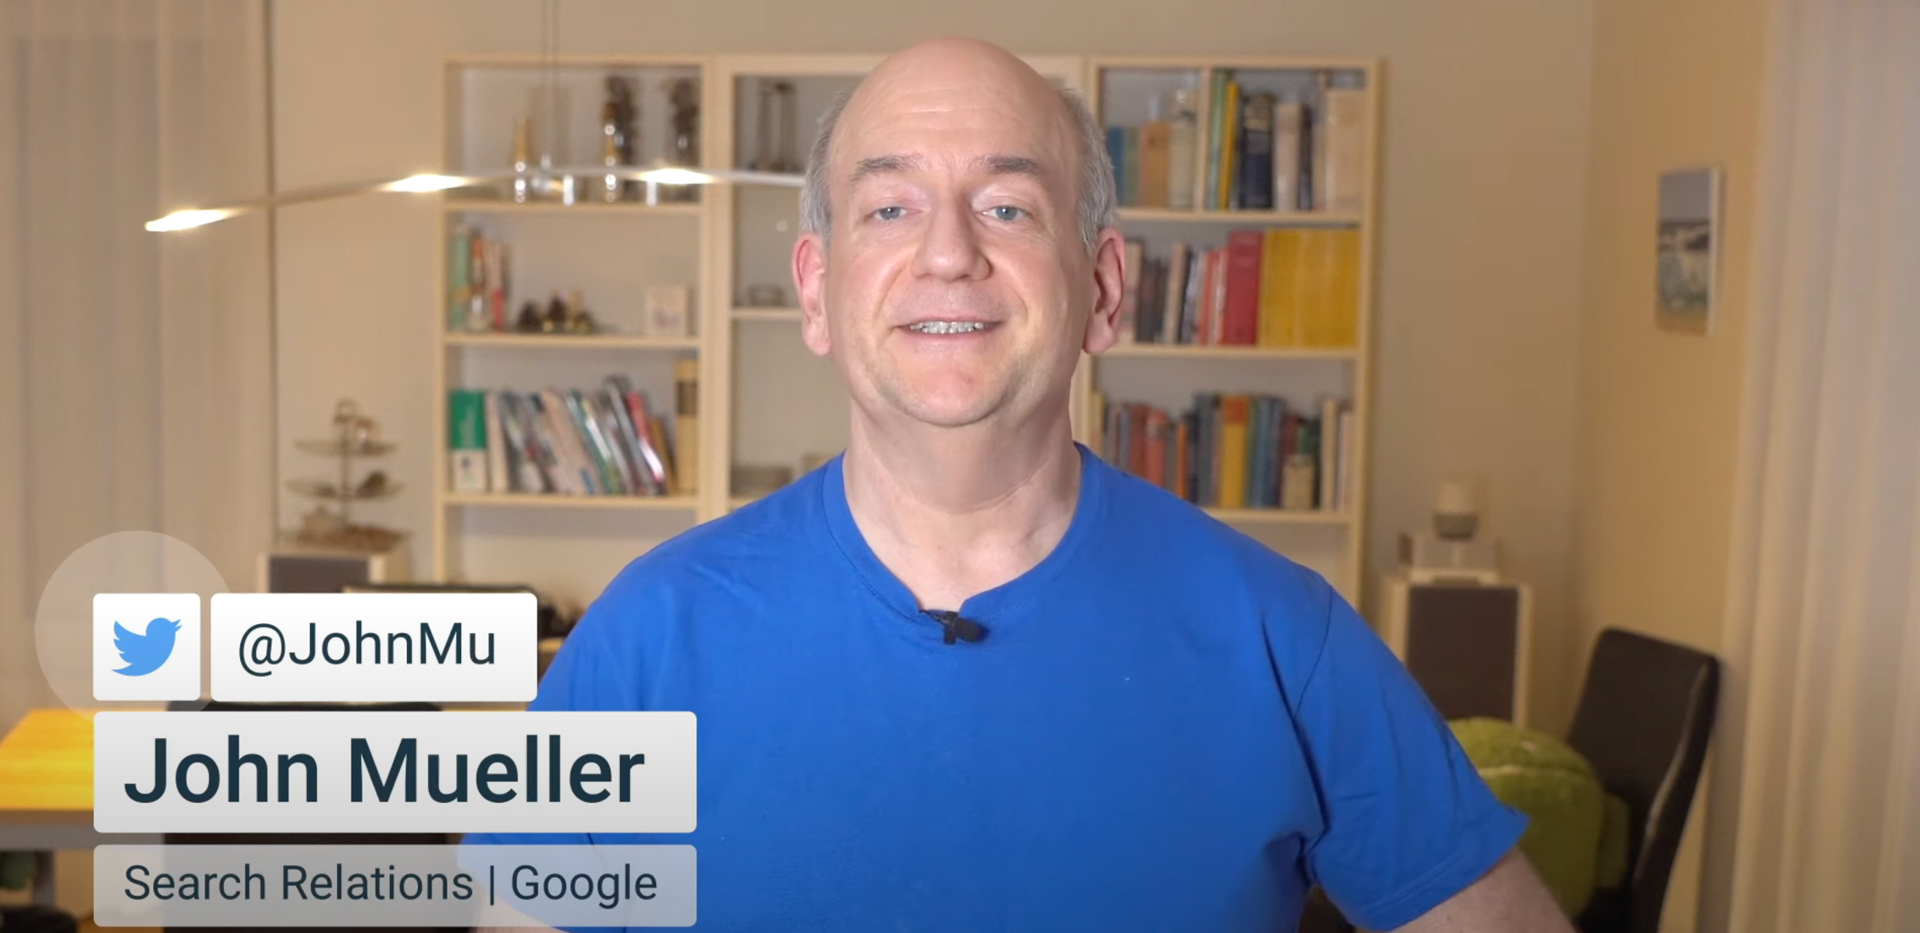 Google Says No Ranking Factor Compensates For Missing Relevance